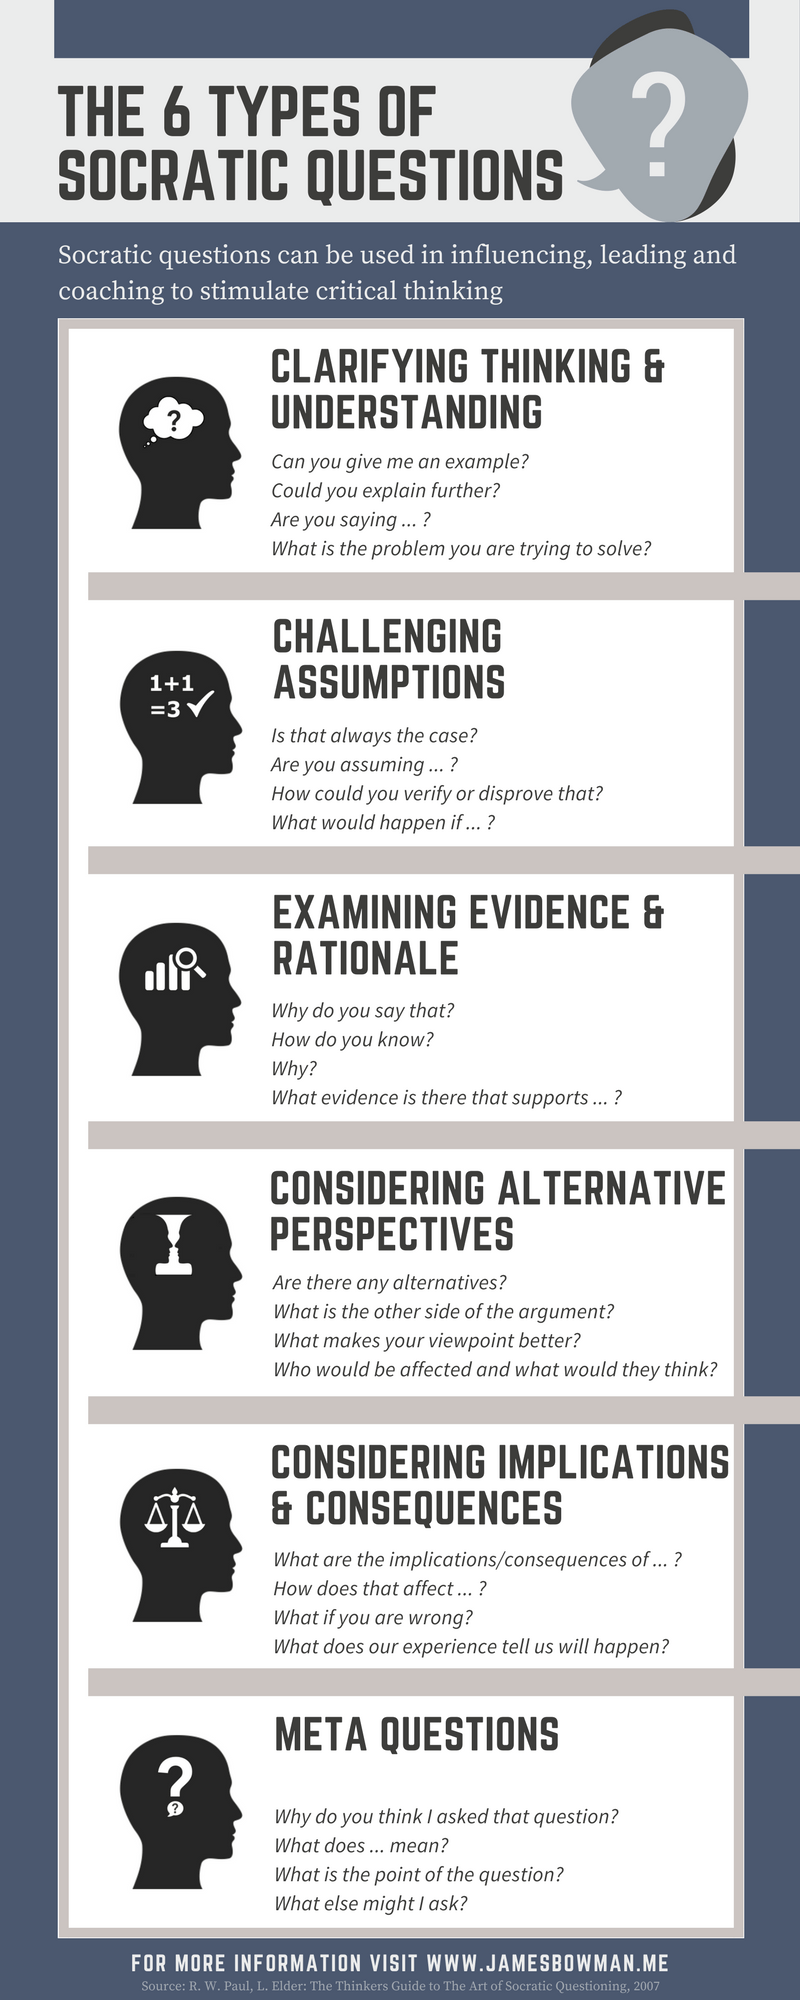 Infographic illustrating the 6 types of Socratic Question